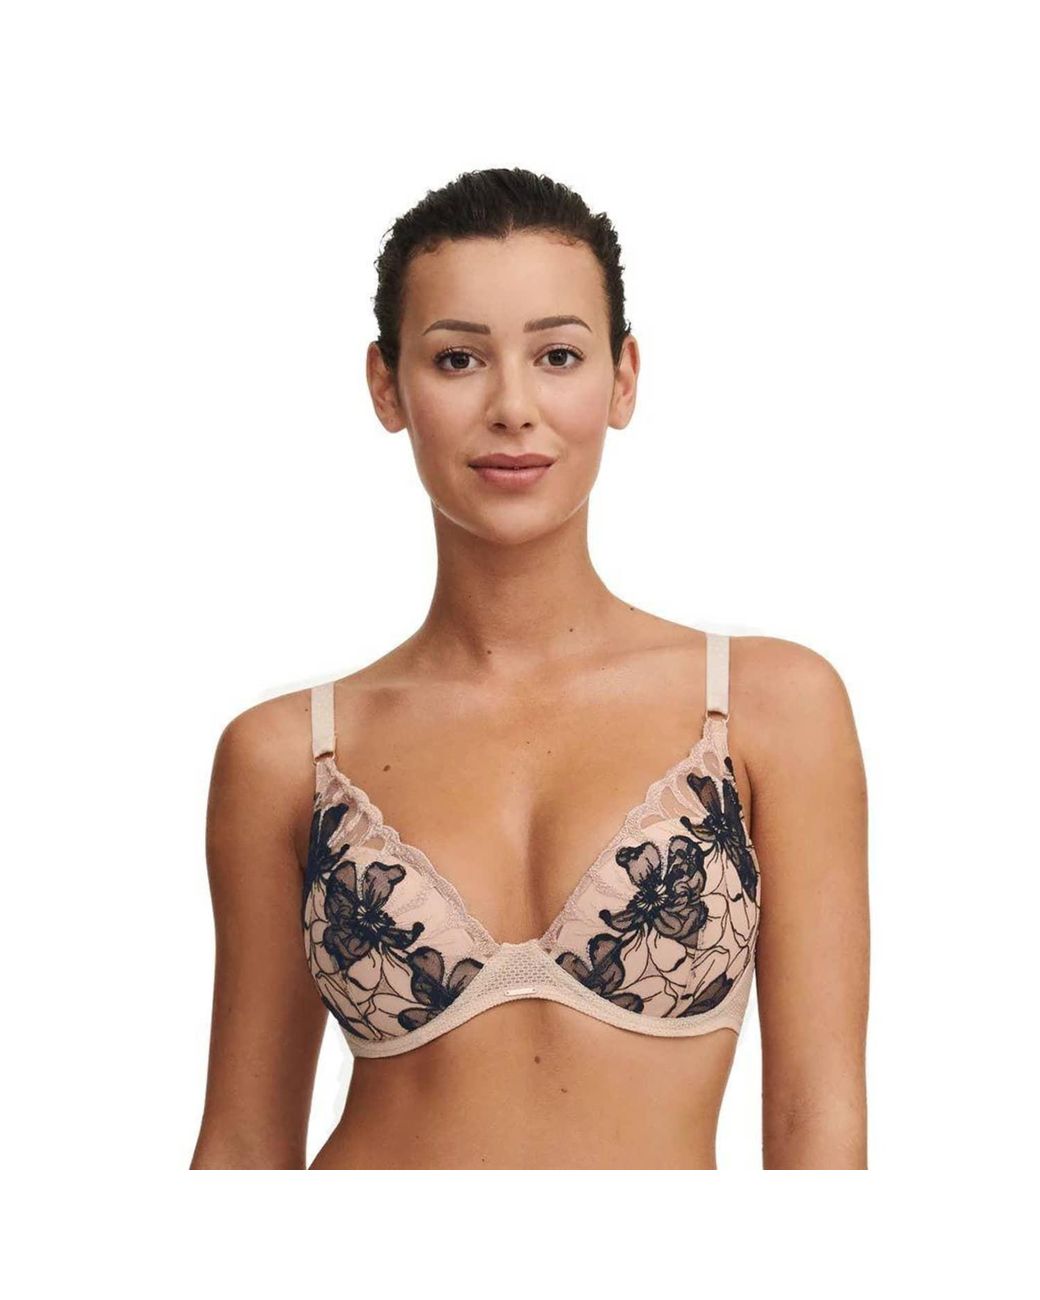 Chantelle 11m1 True Lace Very Covering Underwired Bra in Black